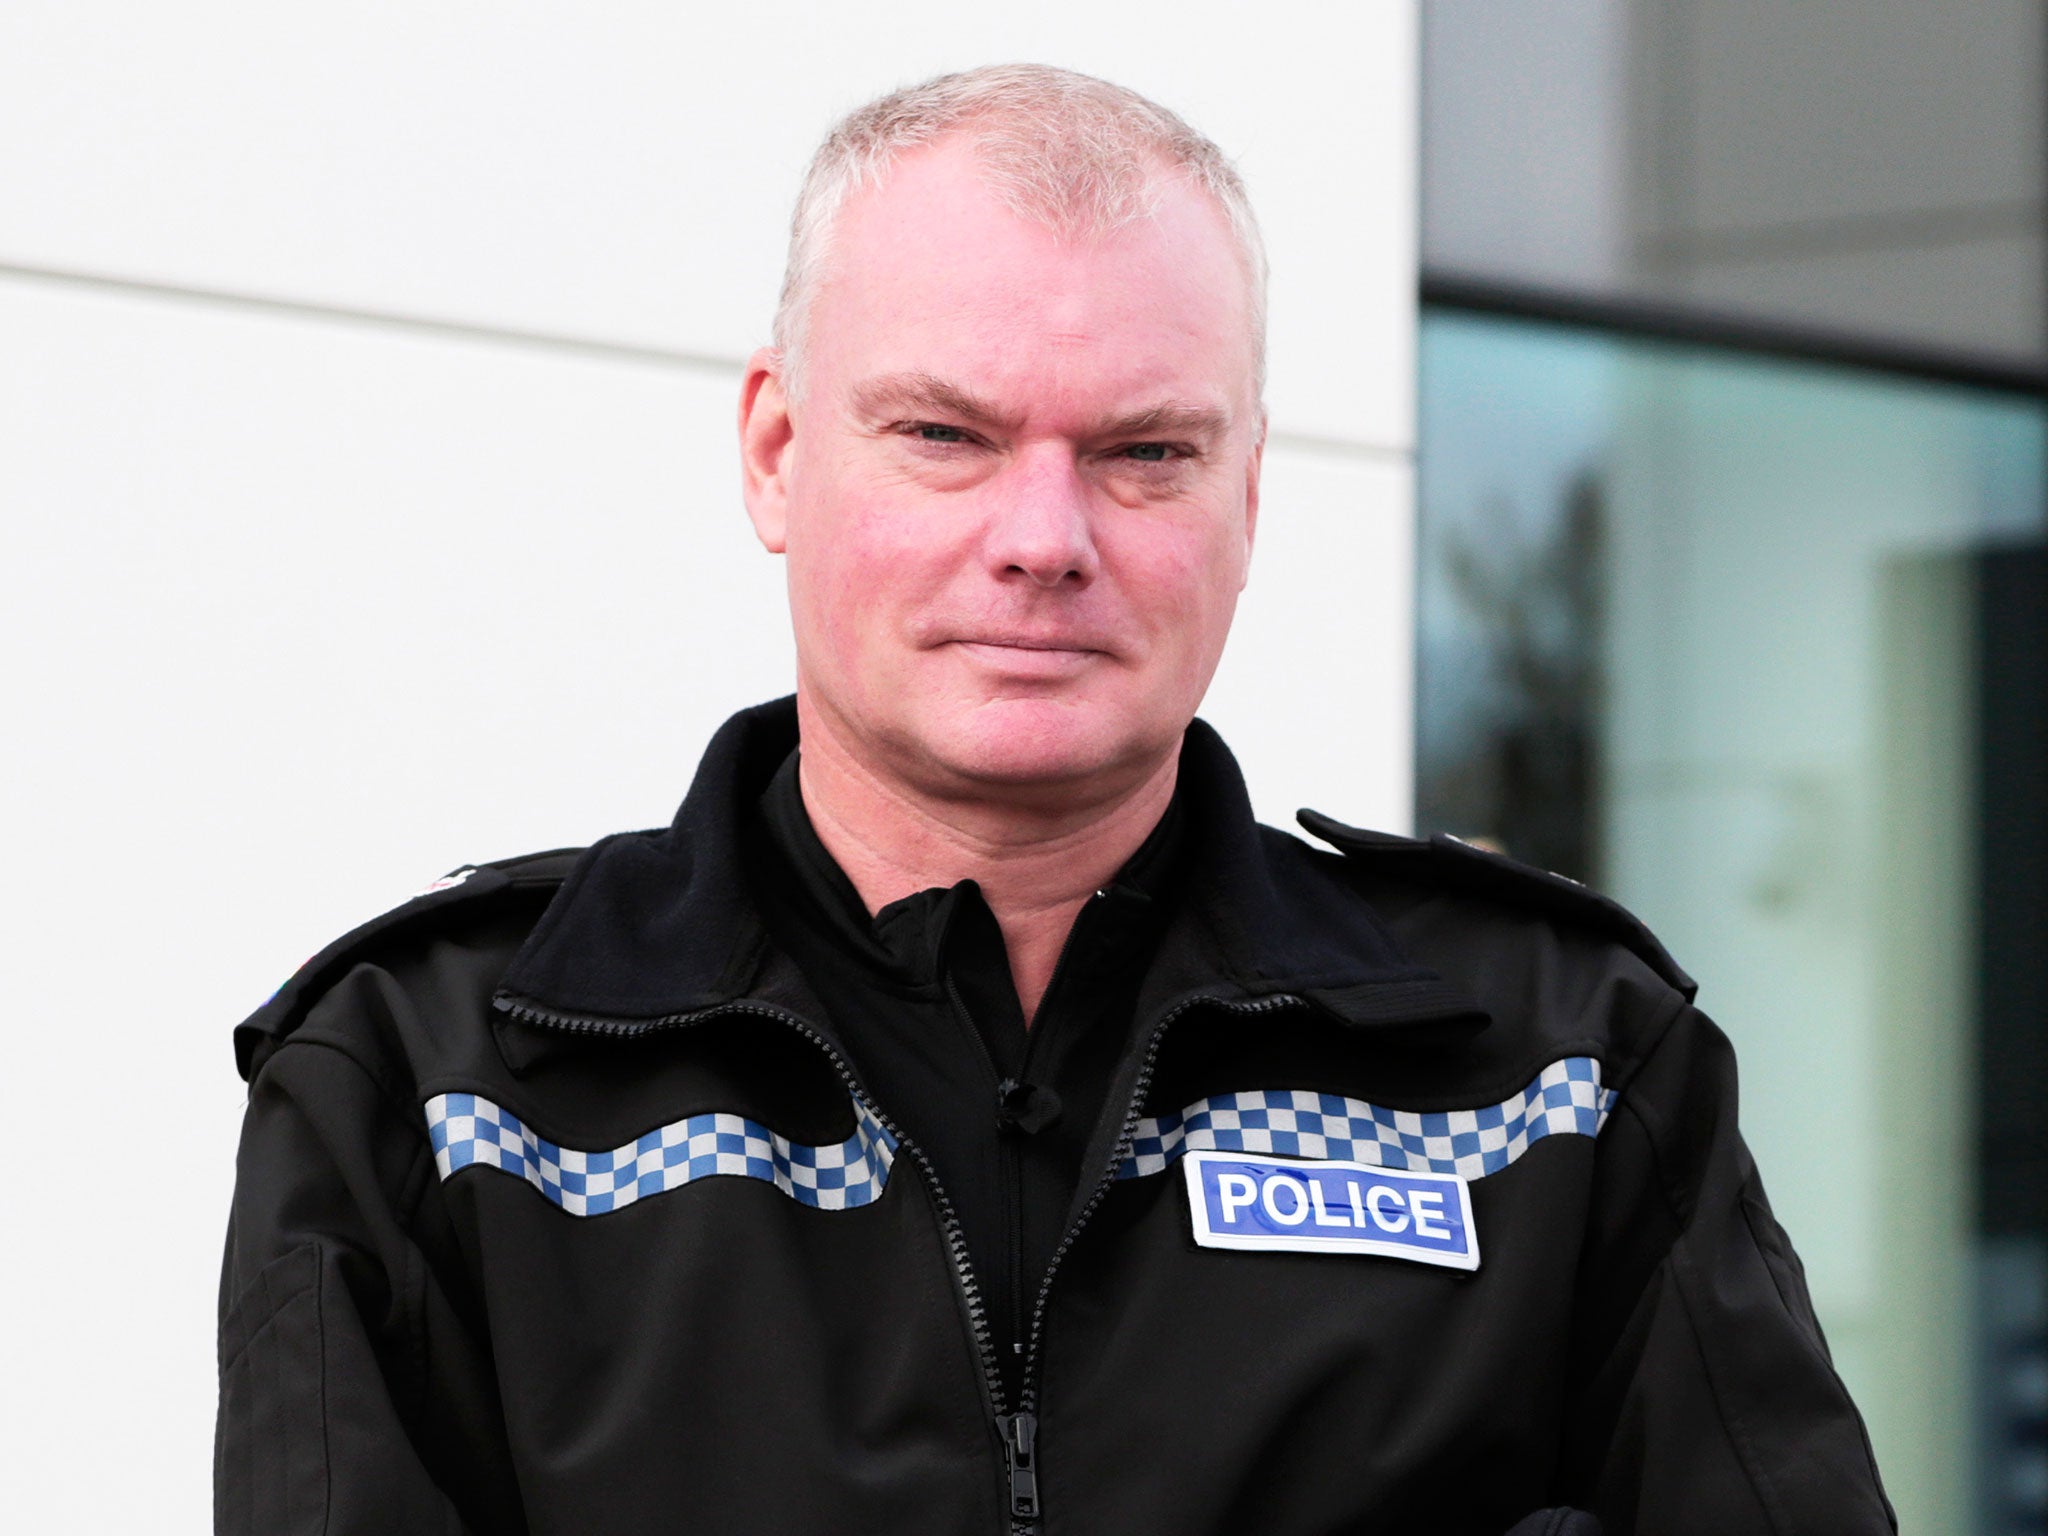 Mike Veale resigned from his post as chief constable of Cleveland Police with immediate effect